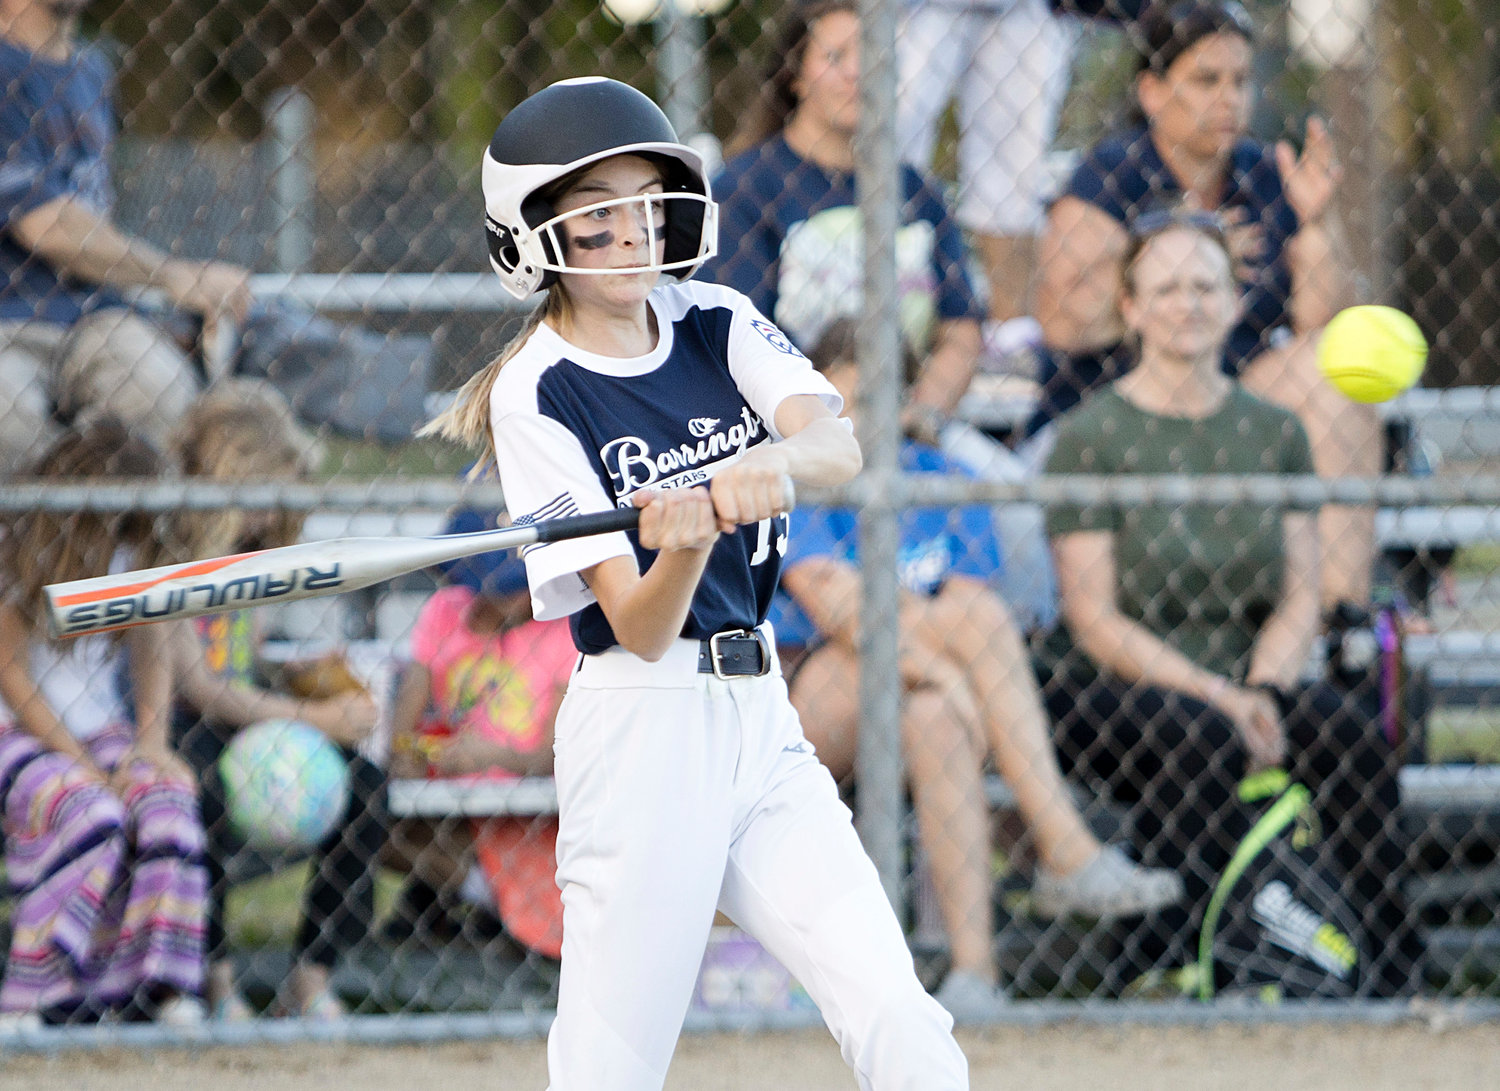 Addison O'Byrne goes up to bat against Tiverton during the 12U All-Star playoffs, Wednesday.